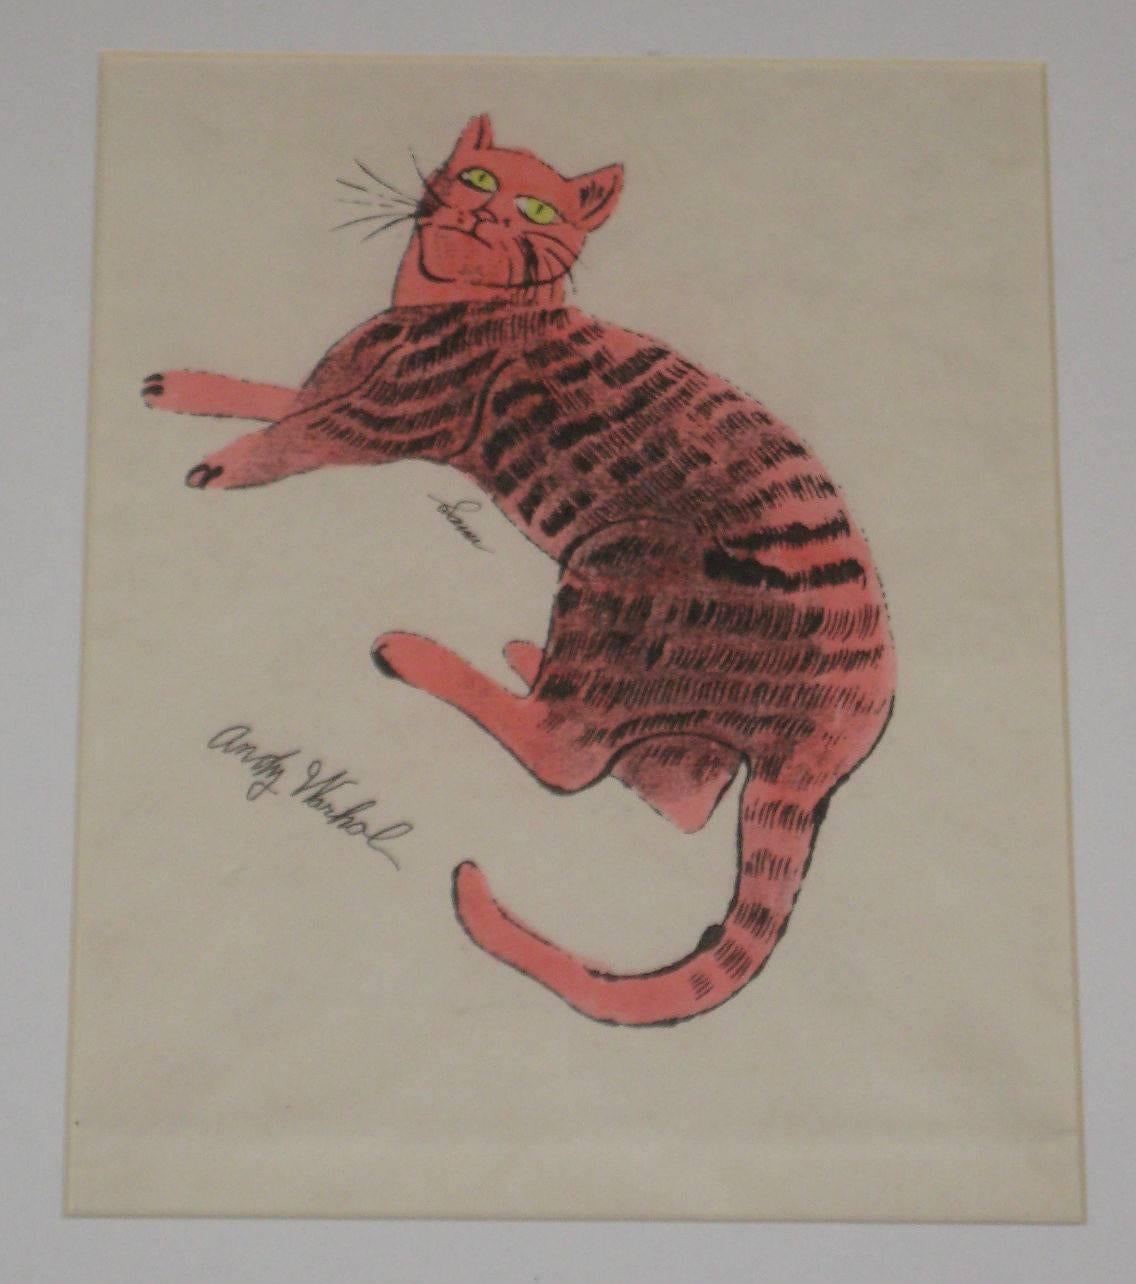 Andy Warhol, American, 1928-1987. 25 Cats Name[d] Sam and One Blue Pussy, 